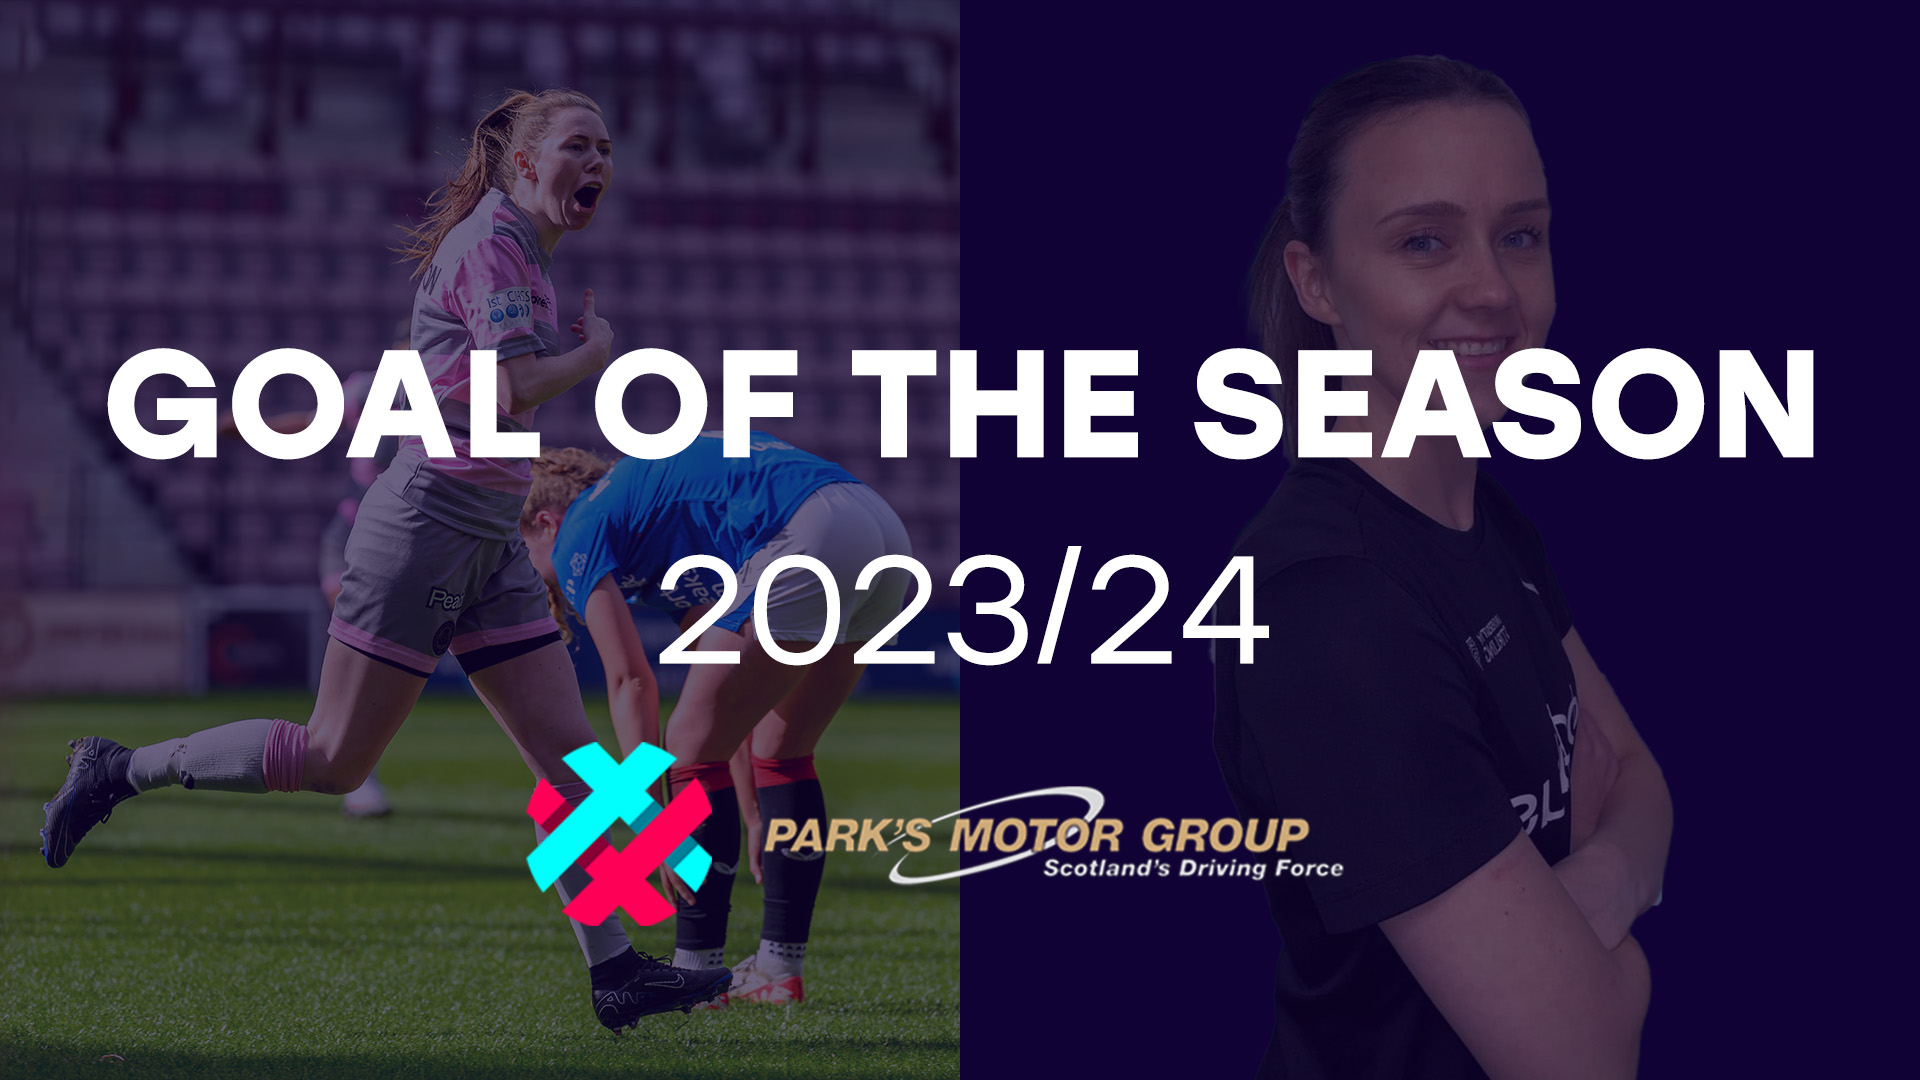 Donaldson and Ovens win 2023/24 Goal of the Season awards